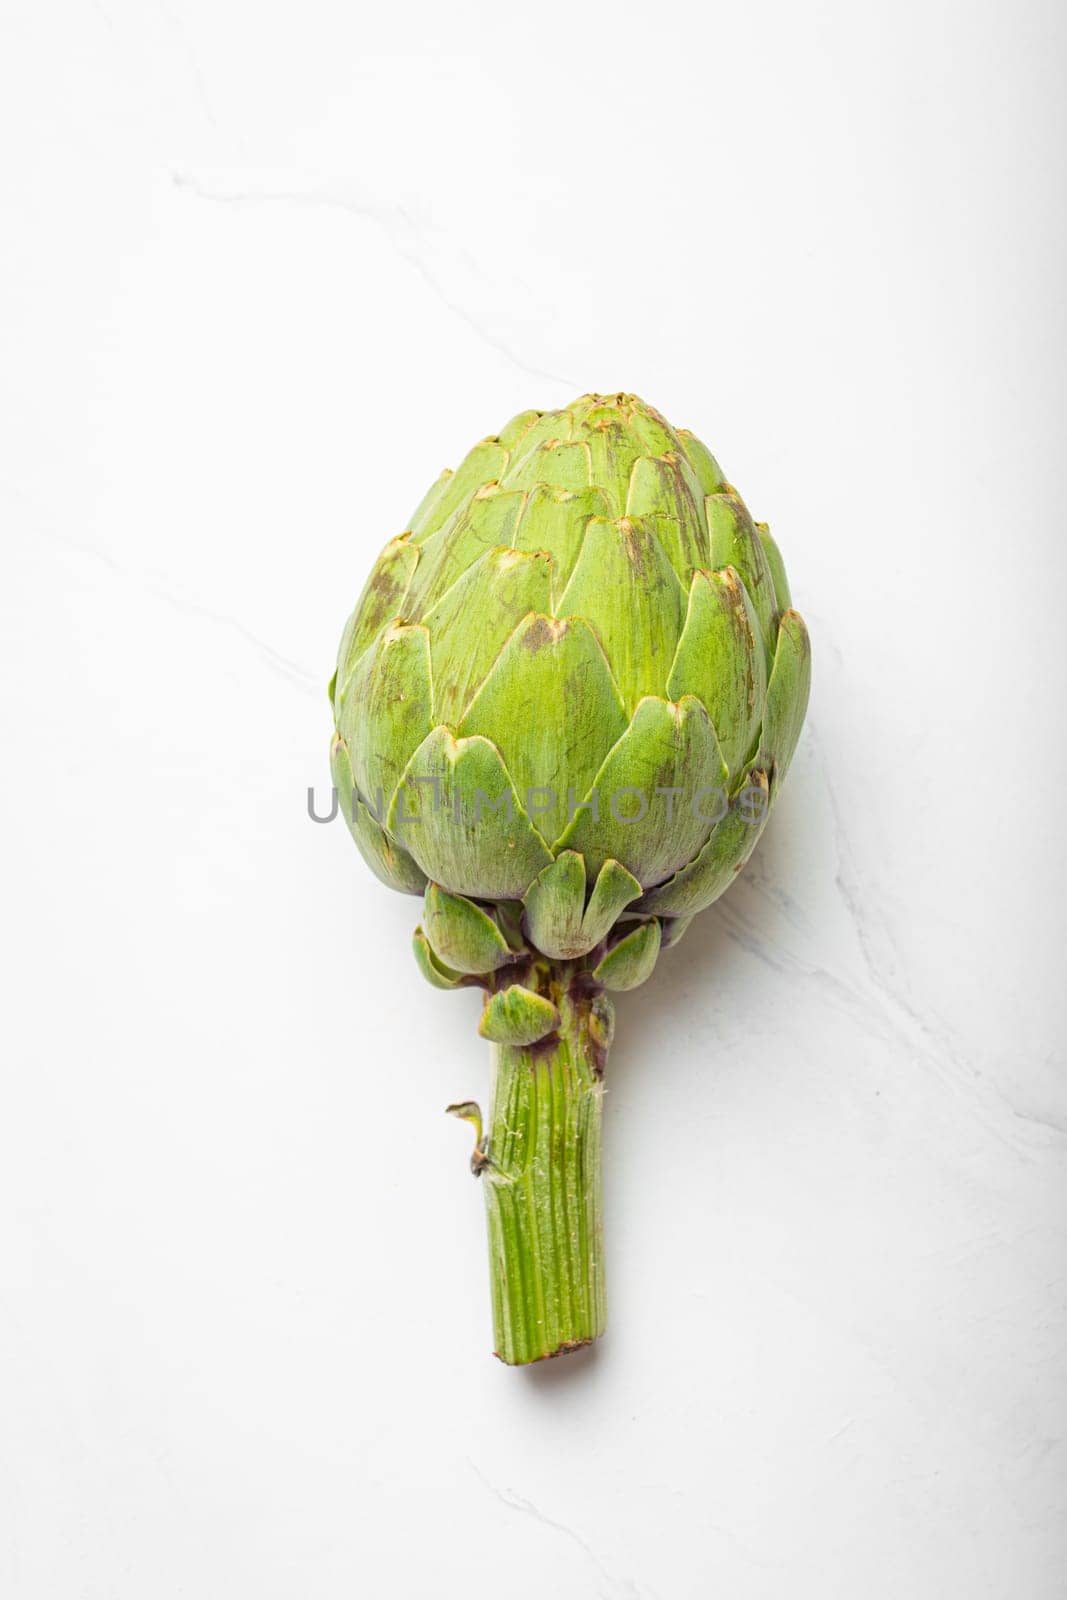 Fresh raw organic farm one artichoke on white marble background top view, healthy artichokes in balanced nutrition and cooking concept